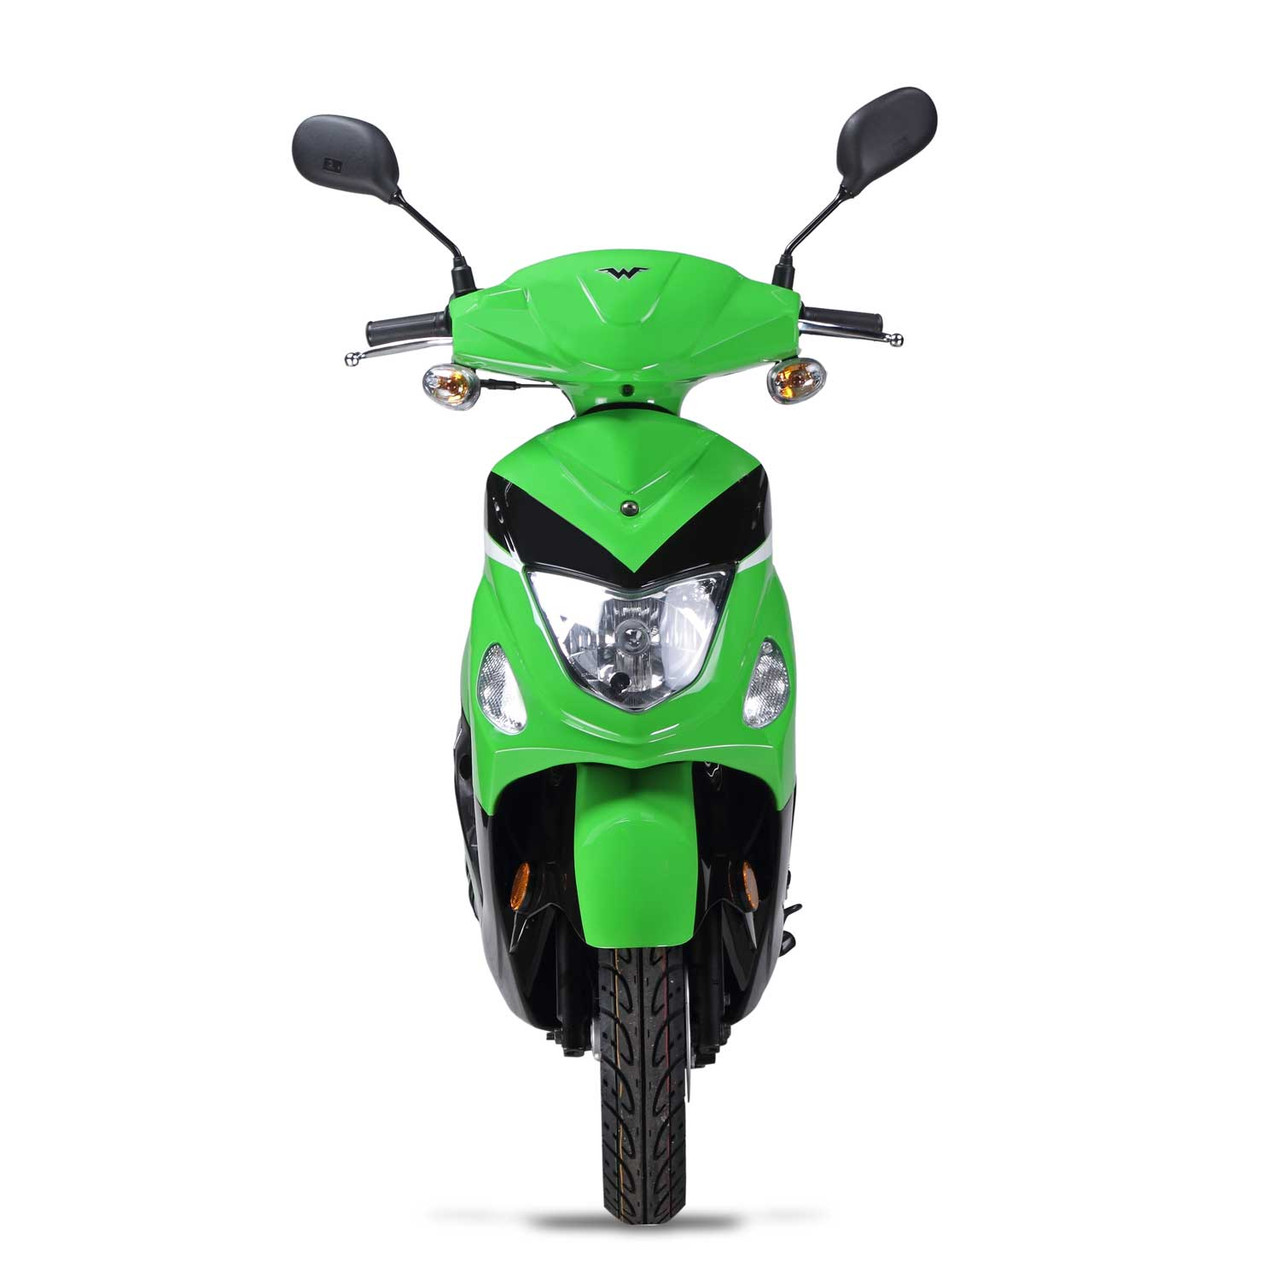 2023 Wolf RX50 (Green)